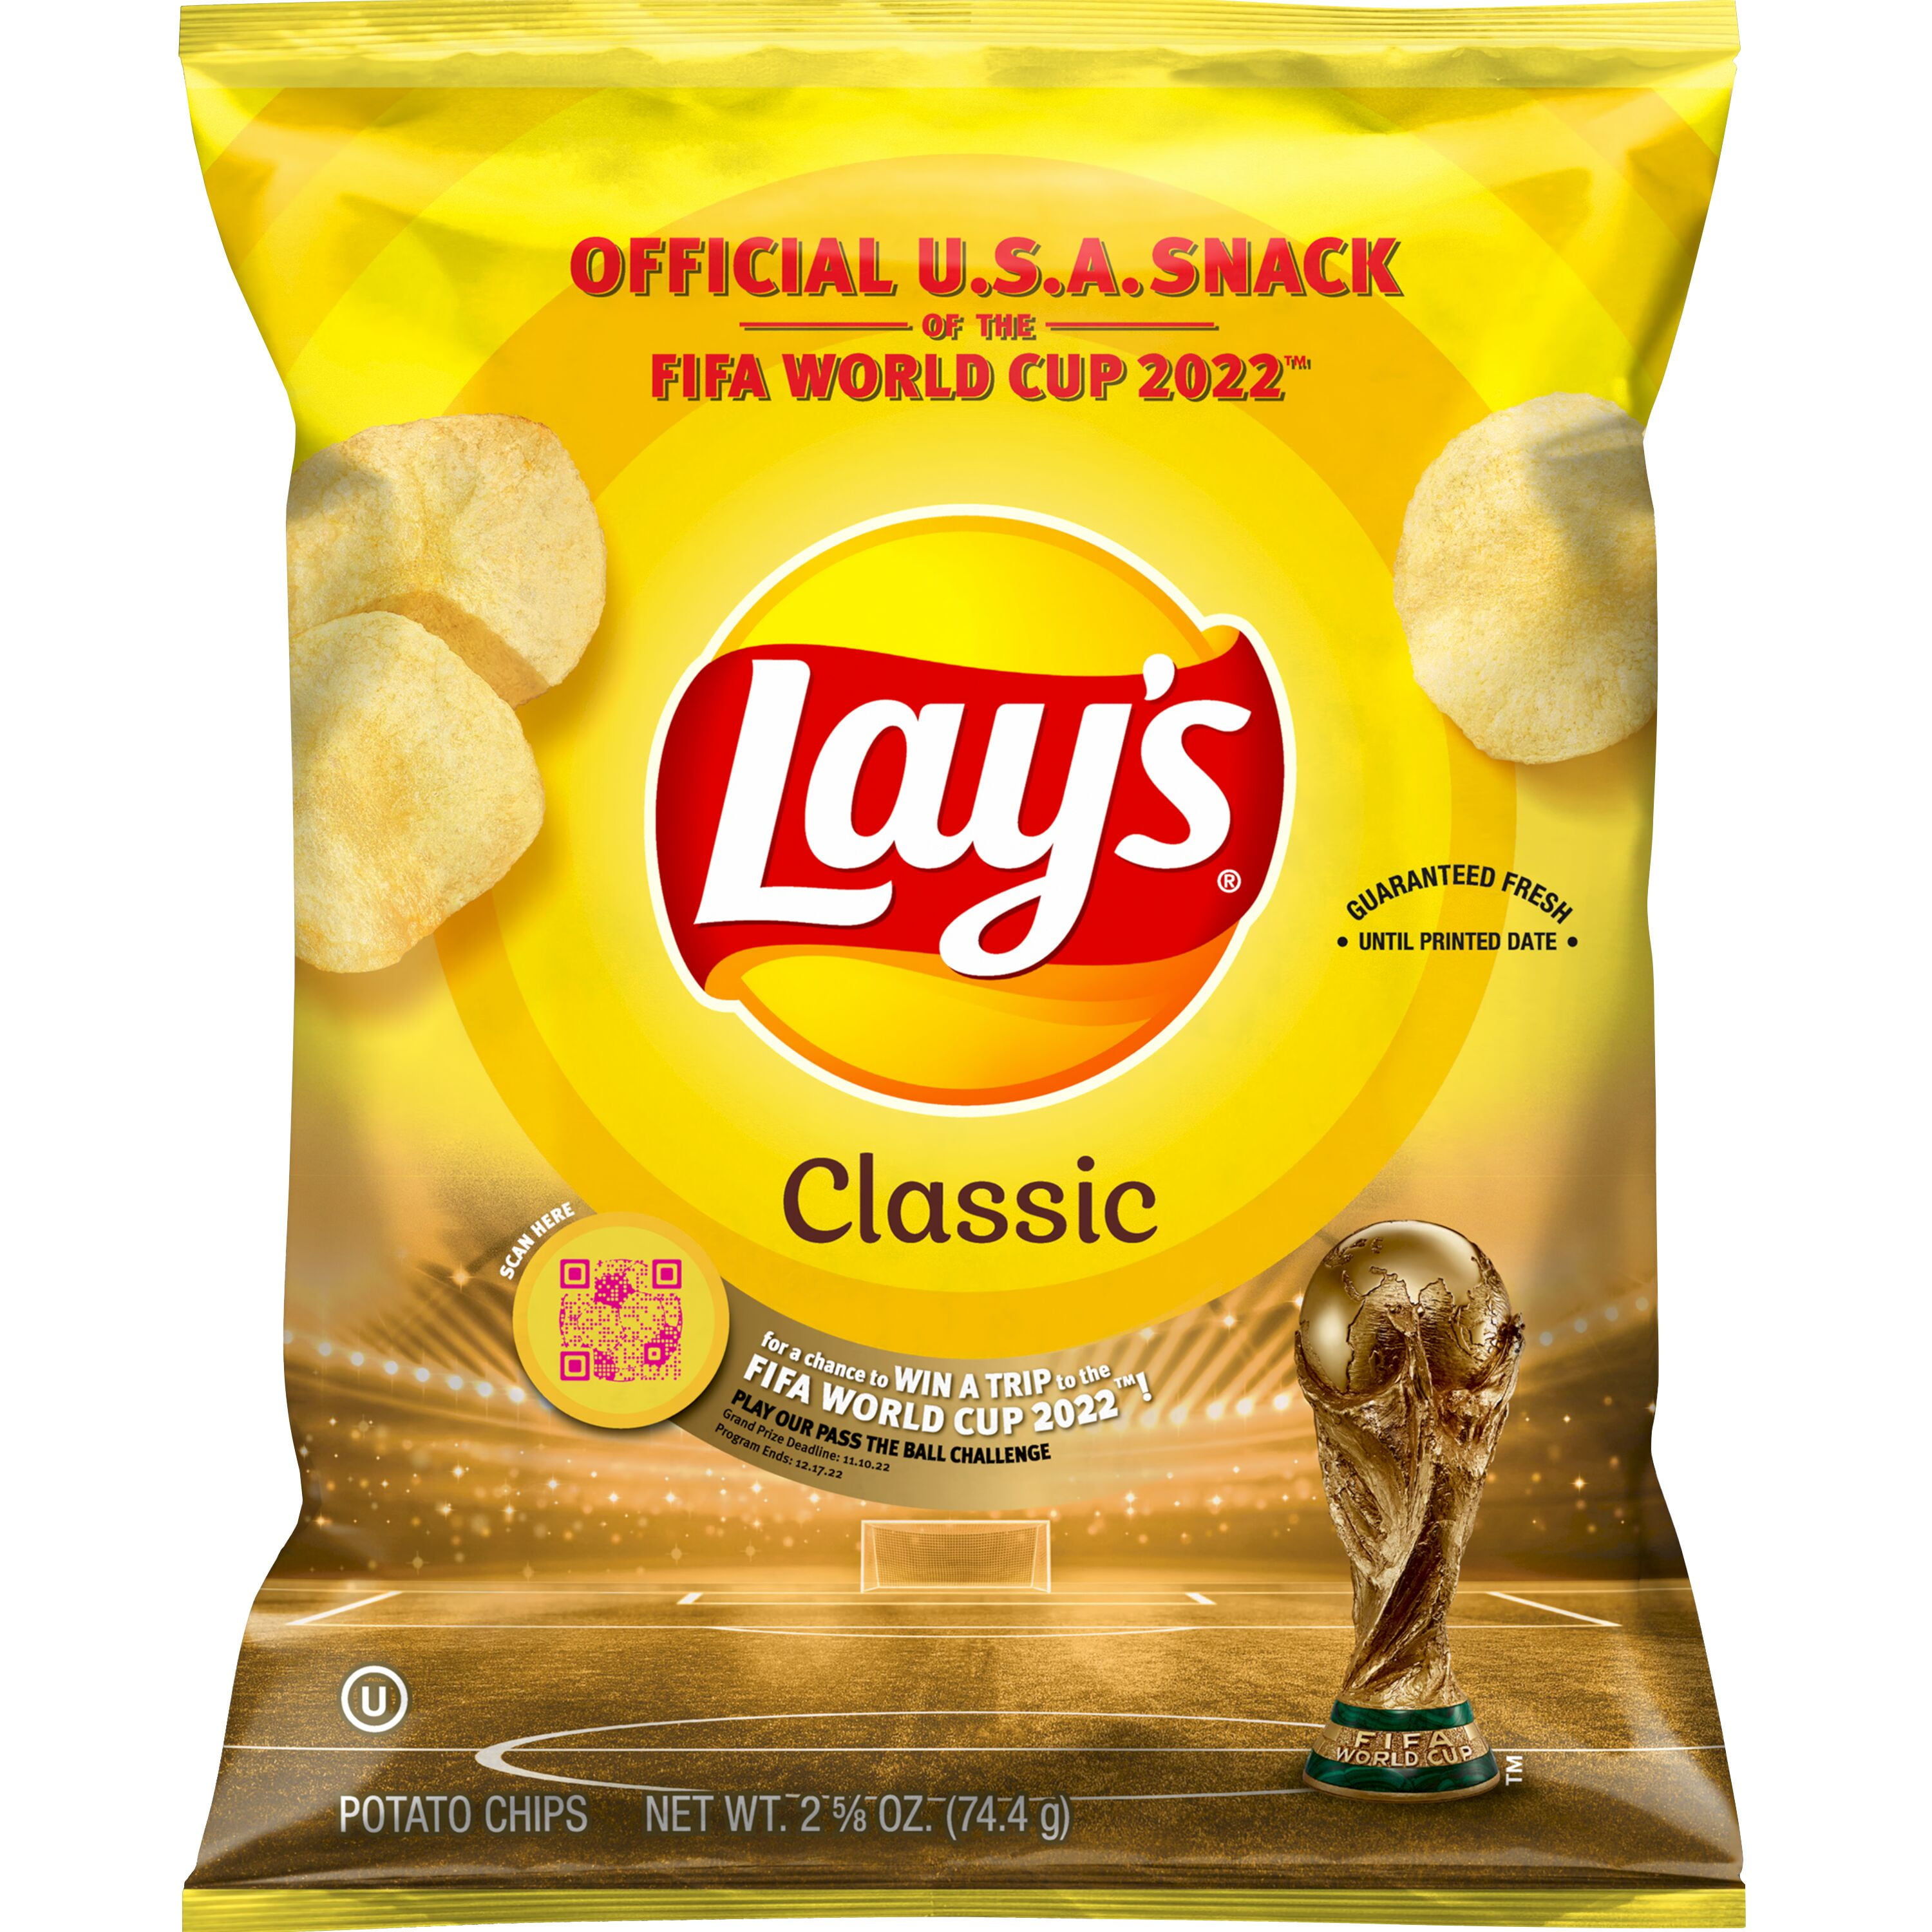 Playground Chips, Shipped or Delivered